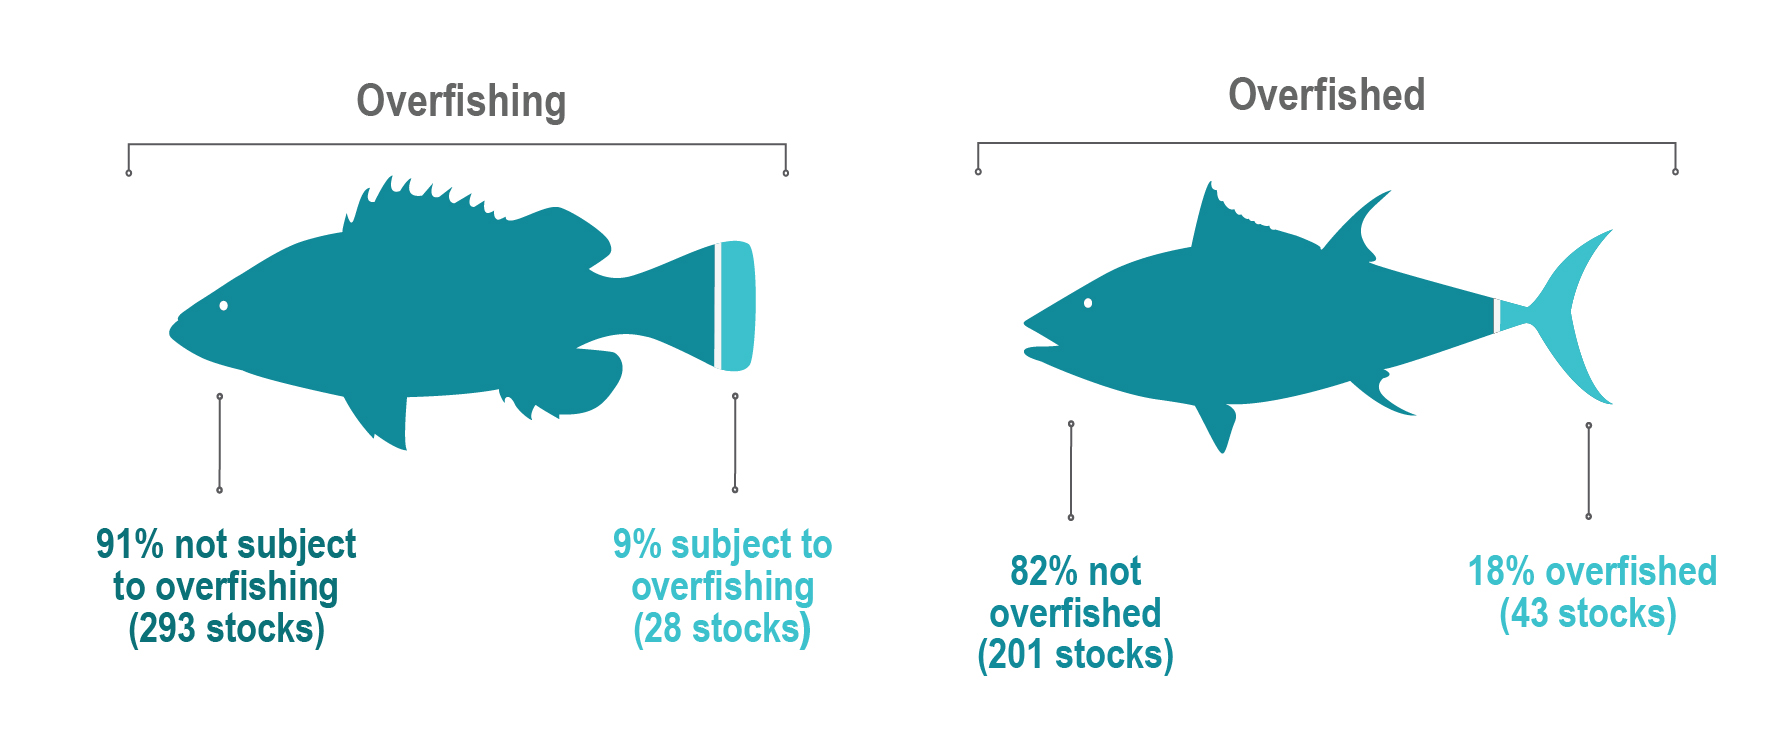 Of 321 stocks with known status, 293 (91%) are not subject to overfishing. Of 244 stocks with known status, 201 (or 82%) are not overfished, leaving 43 stocks (18%) listed as overfished.